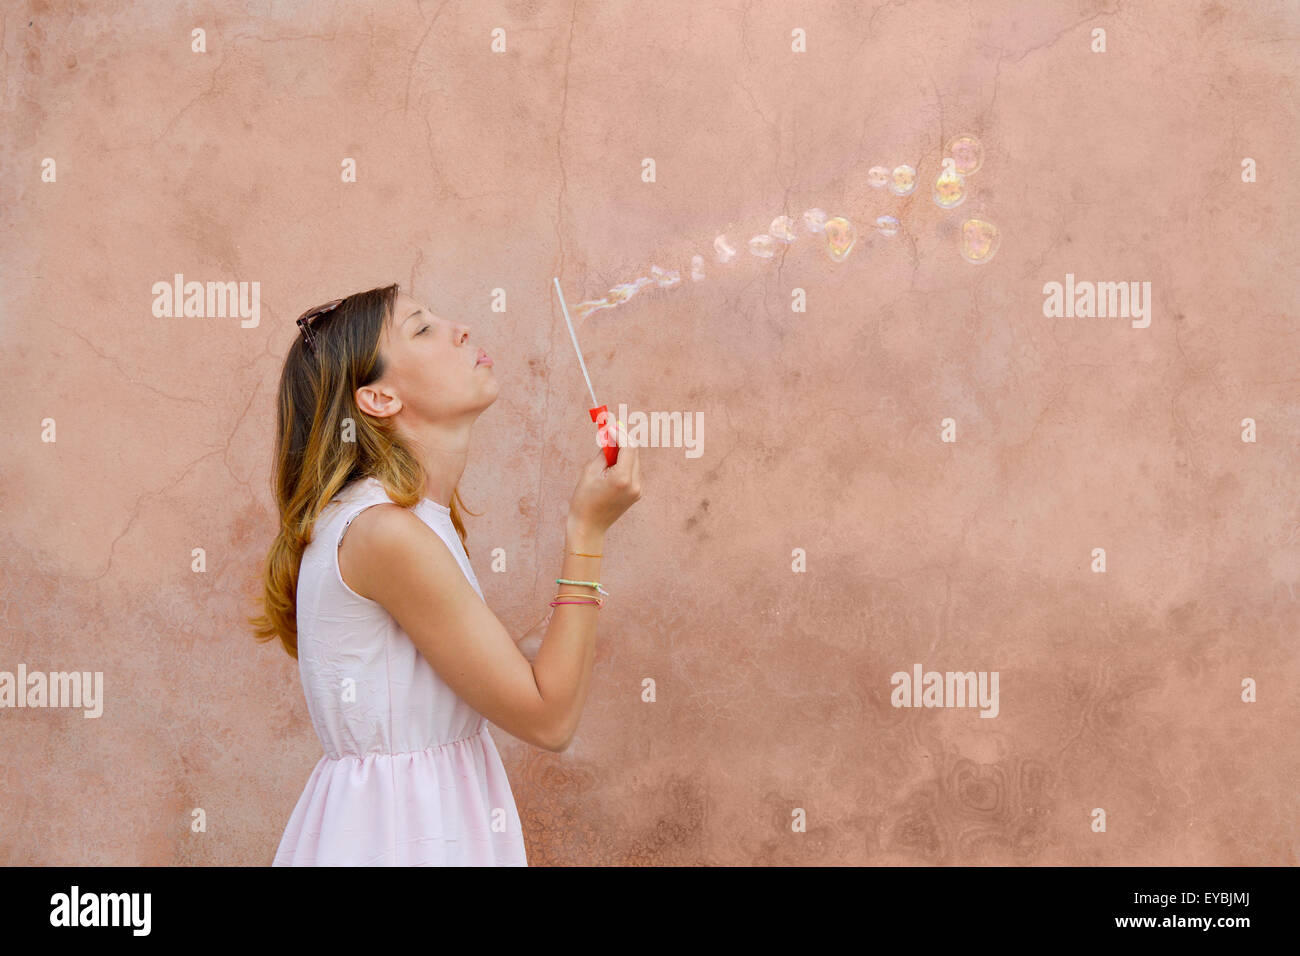 Girl blowing soap bubbles against colourful backdrop wearing pink dress Stock Photo